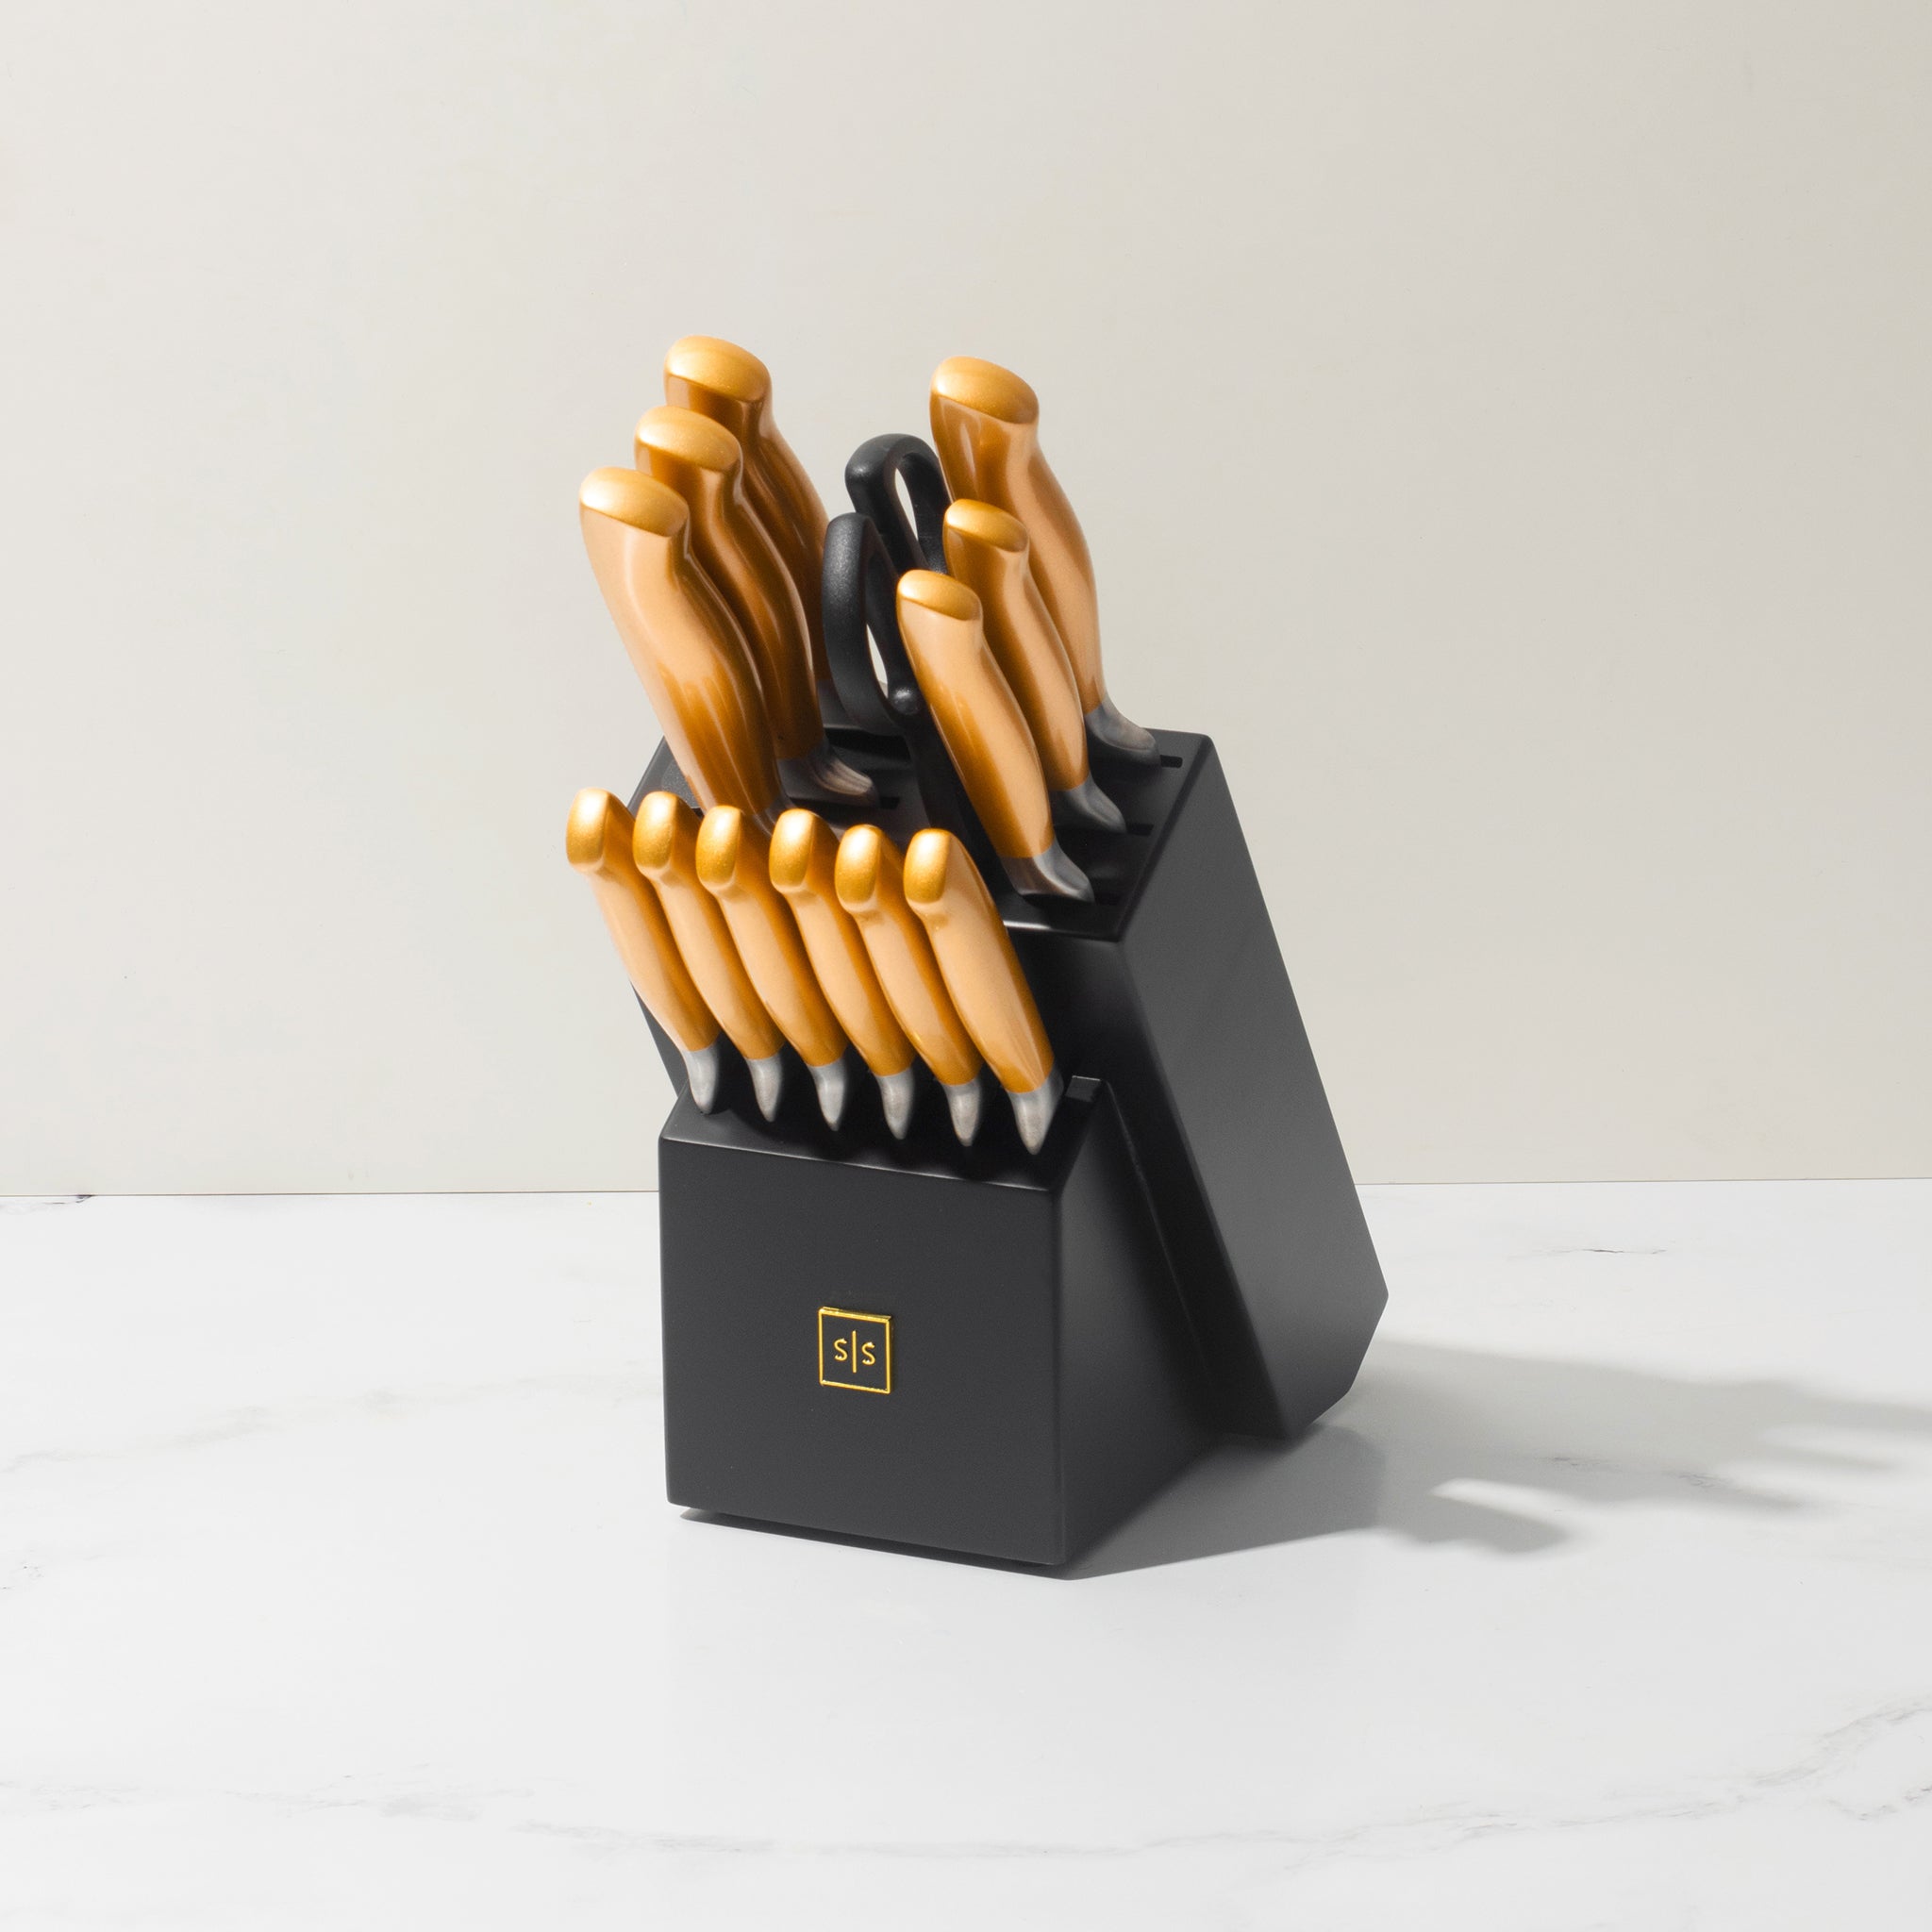 Gold and Silver Knife Set with Self-Sharpening Block - Styled Settings